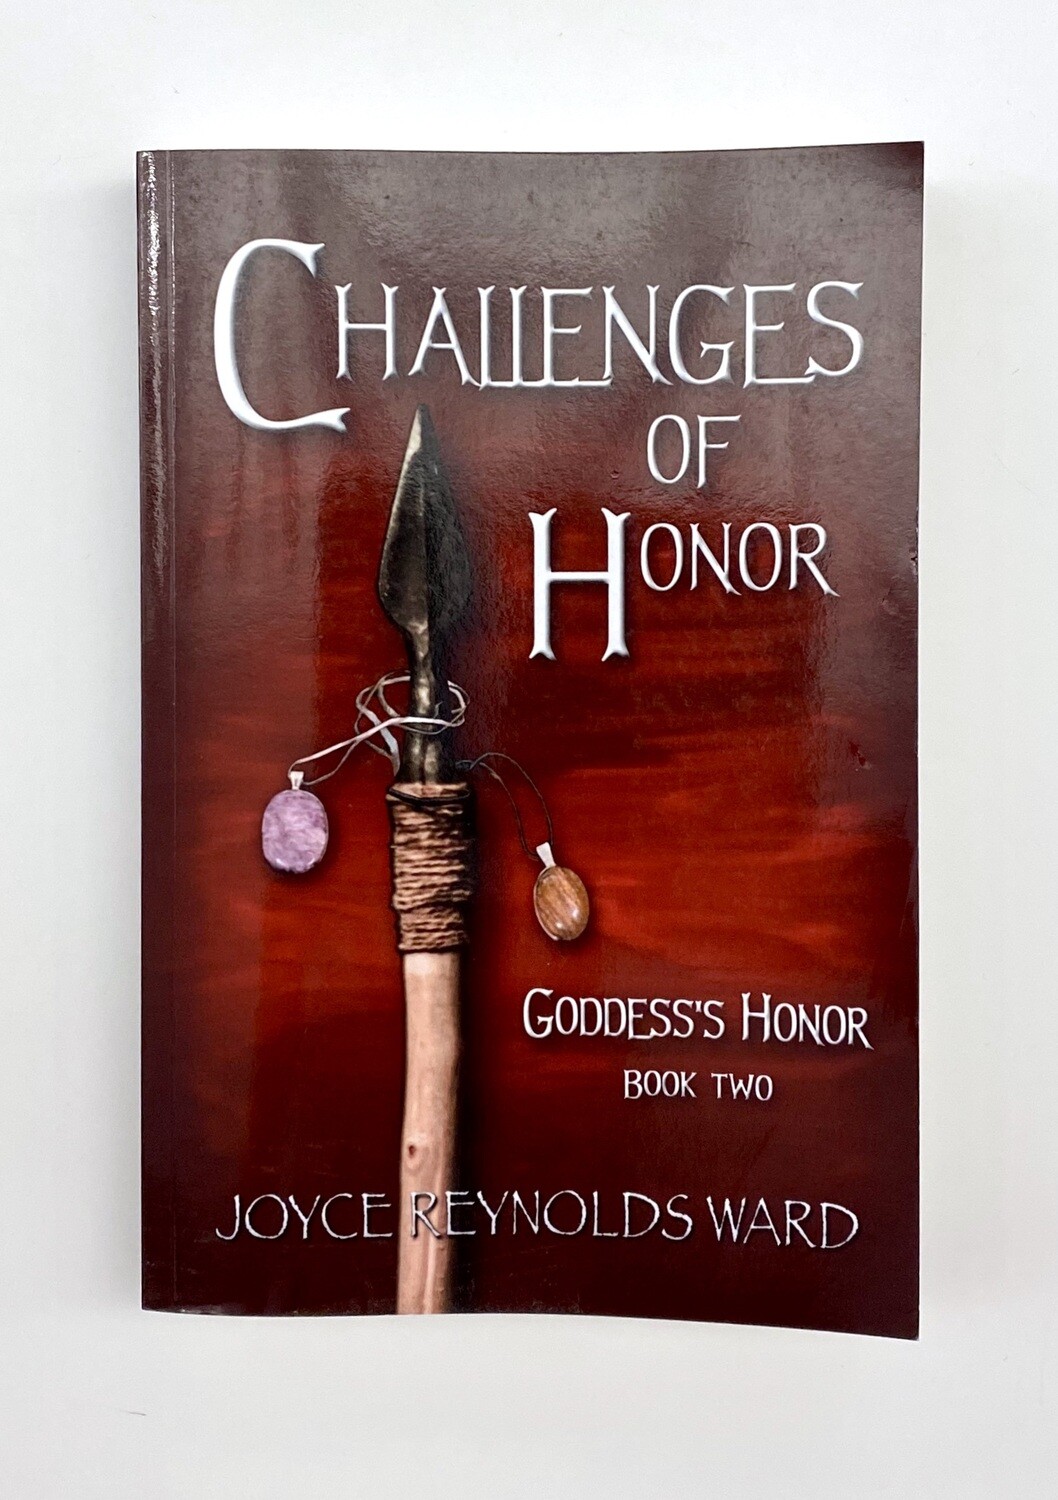 NEW - Challenges of Honor: Goddess&#39;s Honor Book 2, Joyce Reynolds Ward